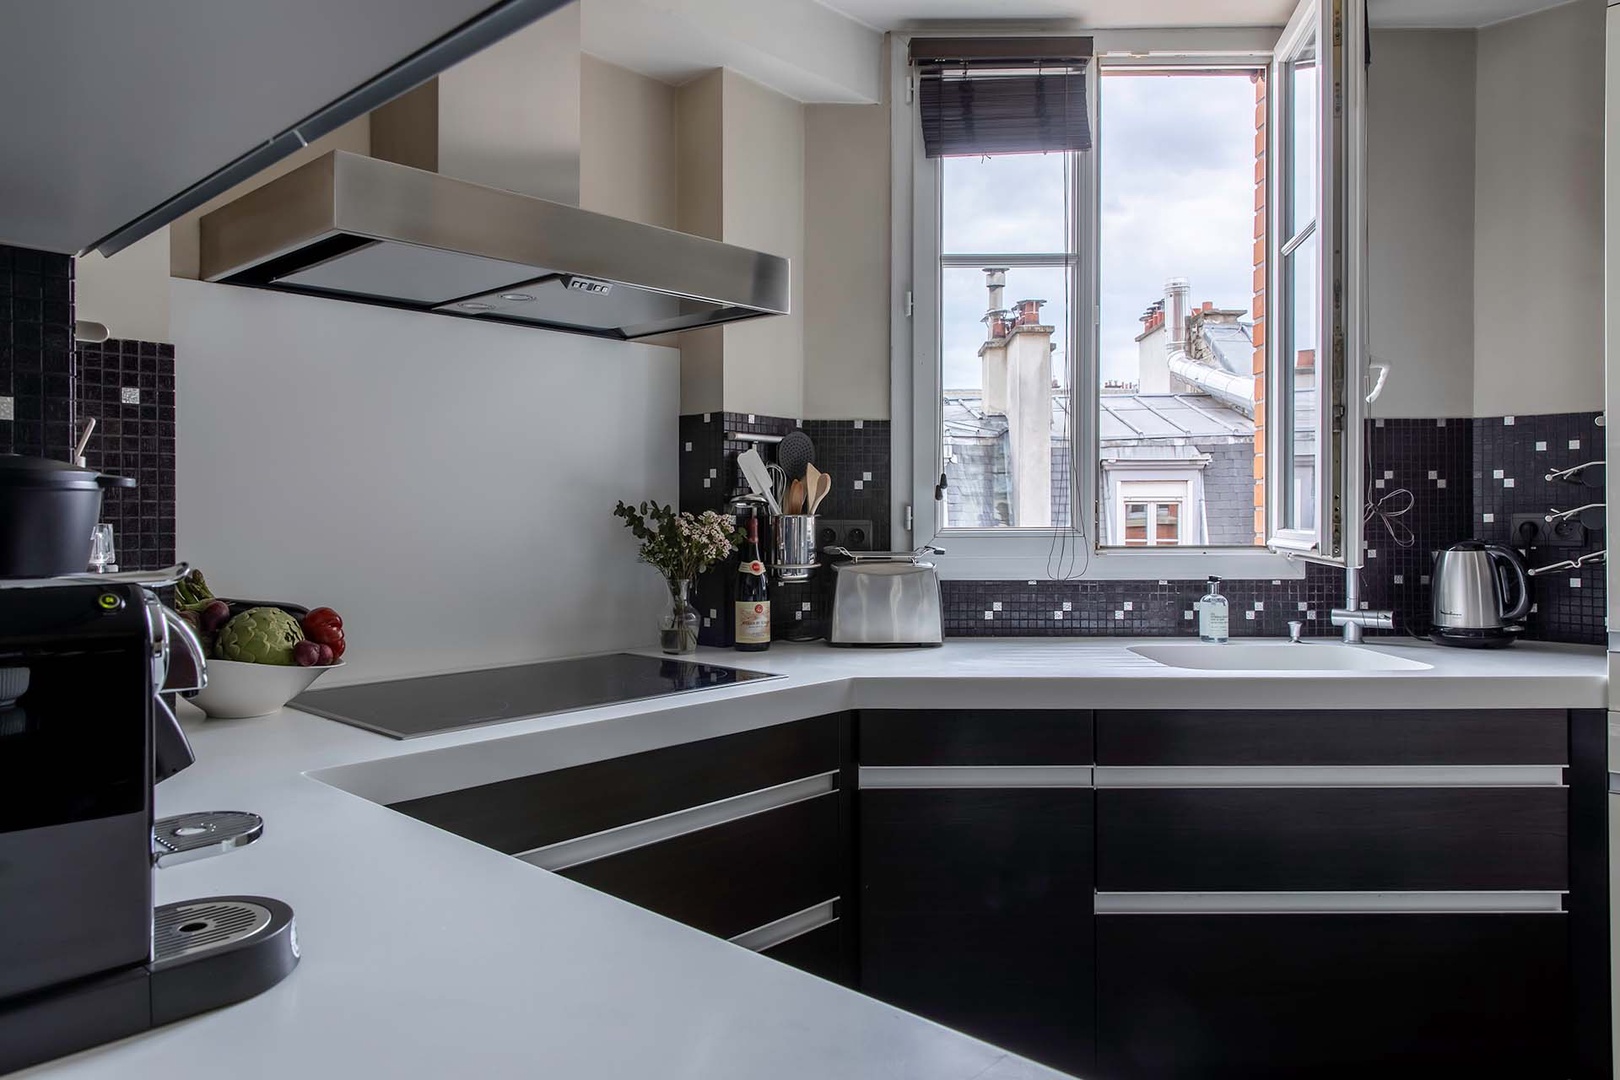 Well-equipped kitchen with classic Parisian rooftop view.